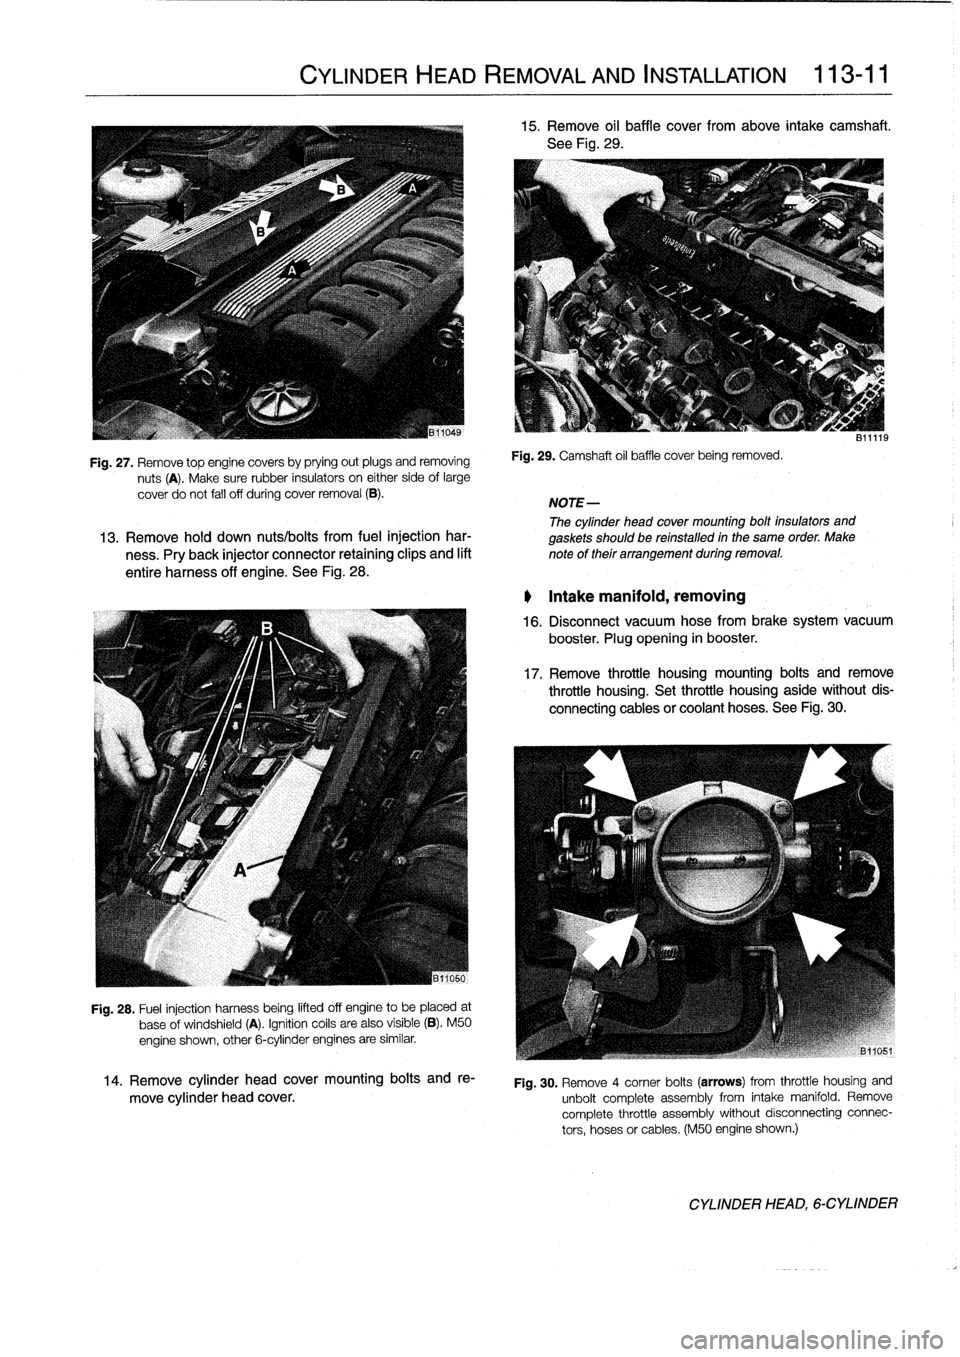 BMW 318i 1997 E36 Repair Manual 
Fig
.
27
.
Remove
top
enginecovers
by
prying
out
plugs
and
removing

nuts
(A)
.
Make
sure
rubber
insulators
on
either
side
of
large

cover
do
not
fall
off
during
cover
removal
(B)
.

Fig
.
28
.
Fuel
